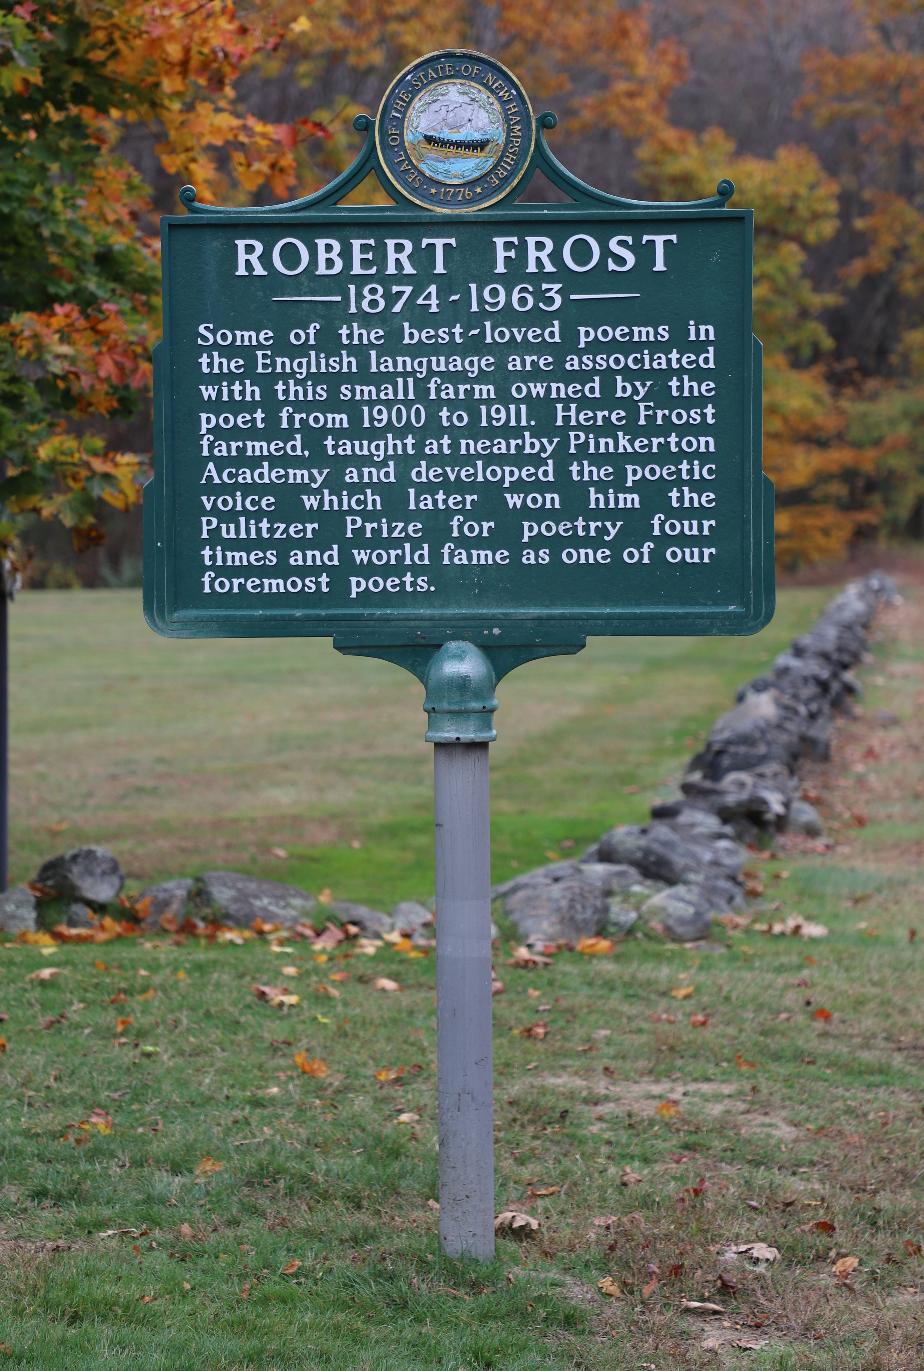 Robert Frost Historical Marker #126 Derry New Hampshire